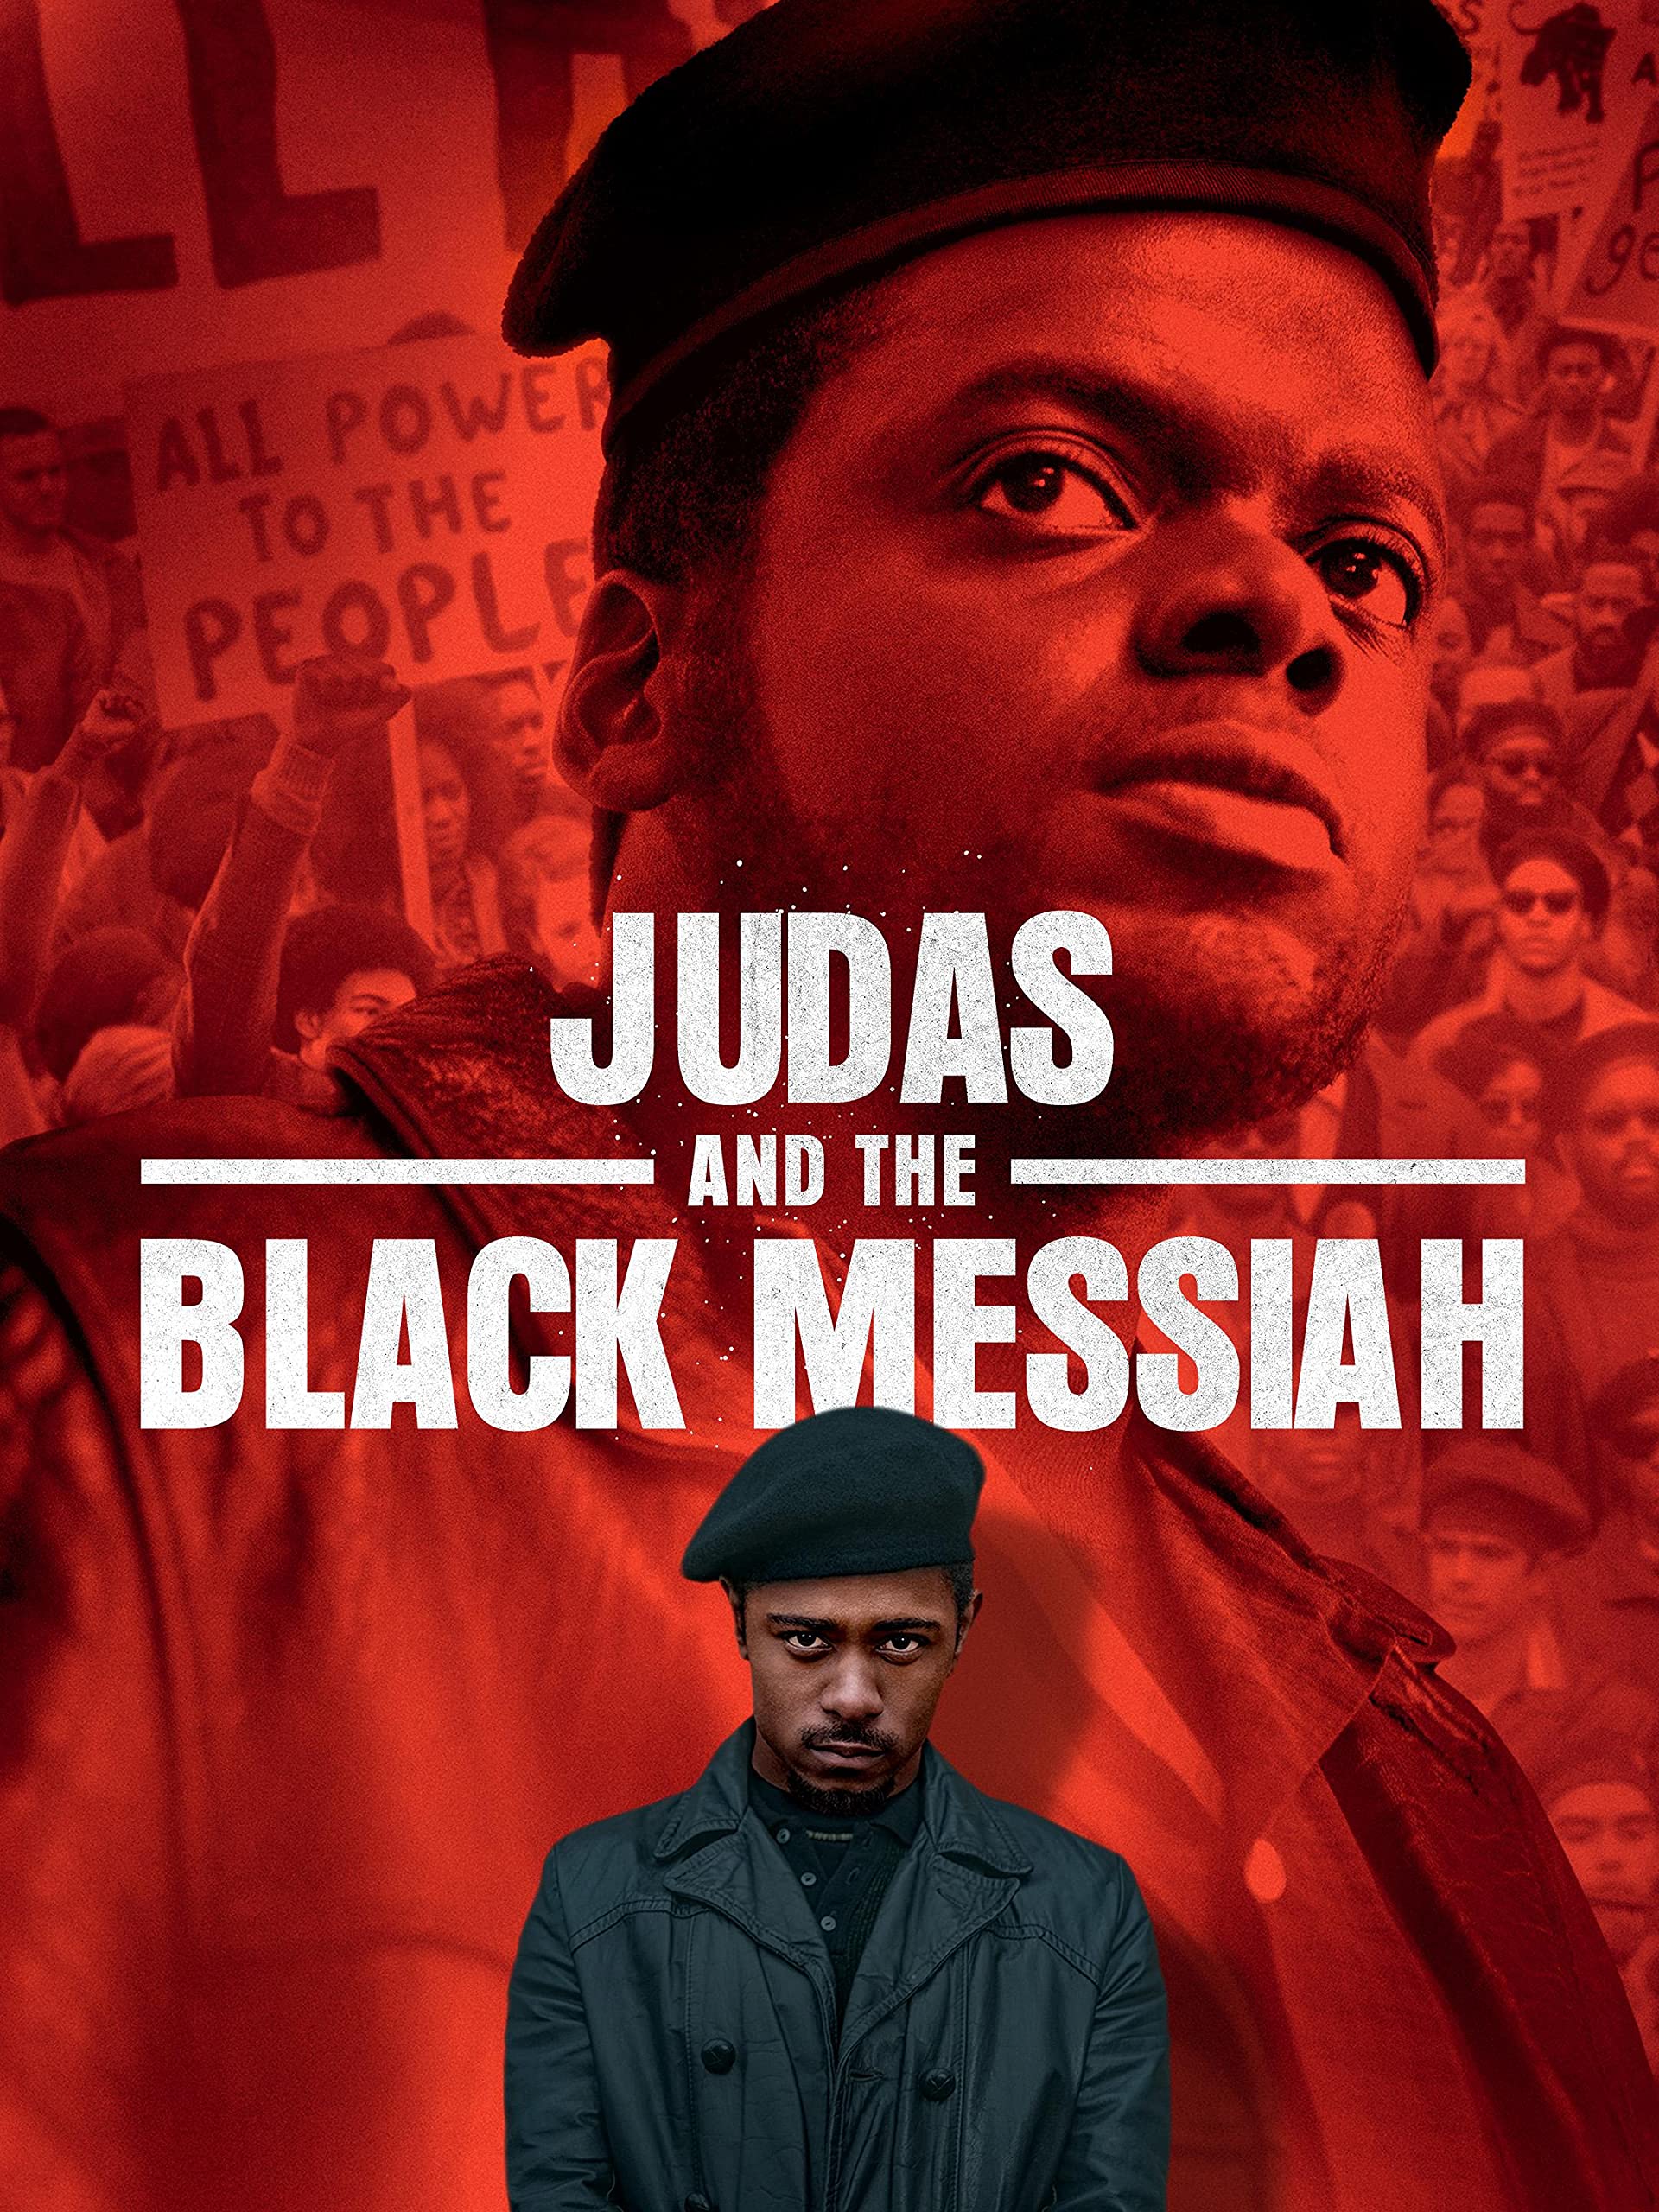 How To Watch ‘Judas And The Black Messiah’ HBO Max